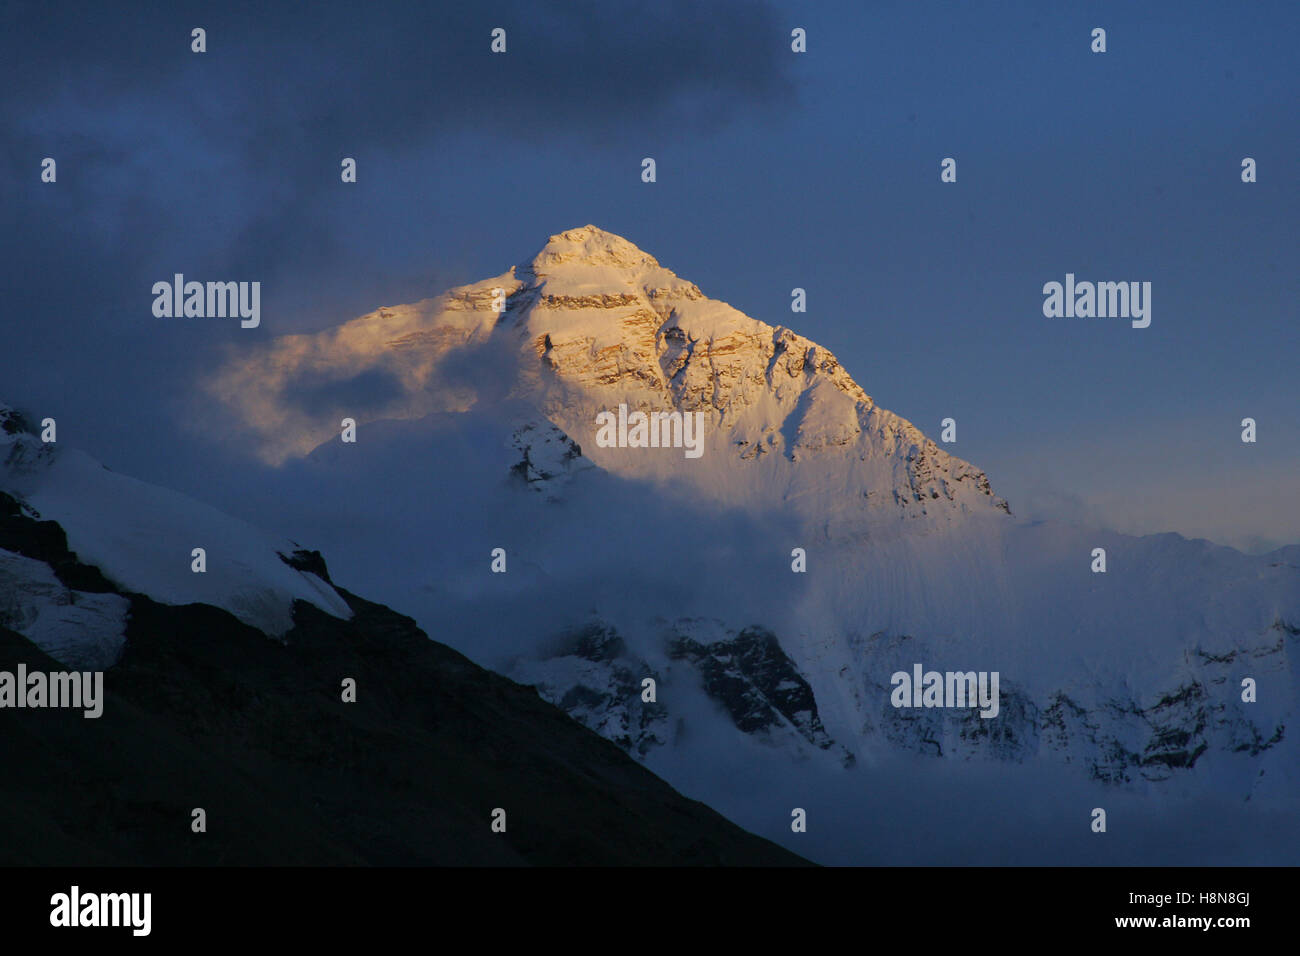 The face of Mount Everest as seen from base camp on the Chinese side Stock Photo